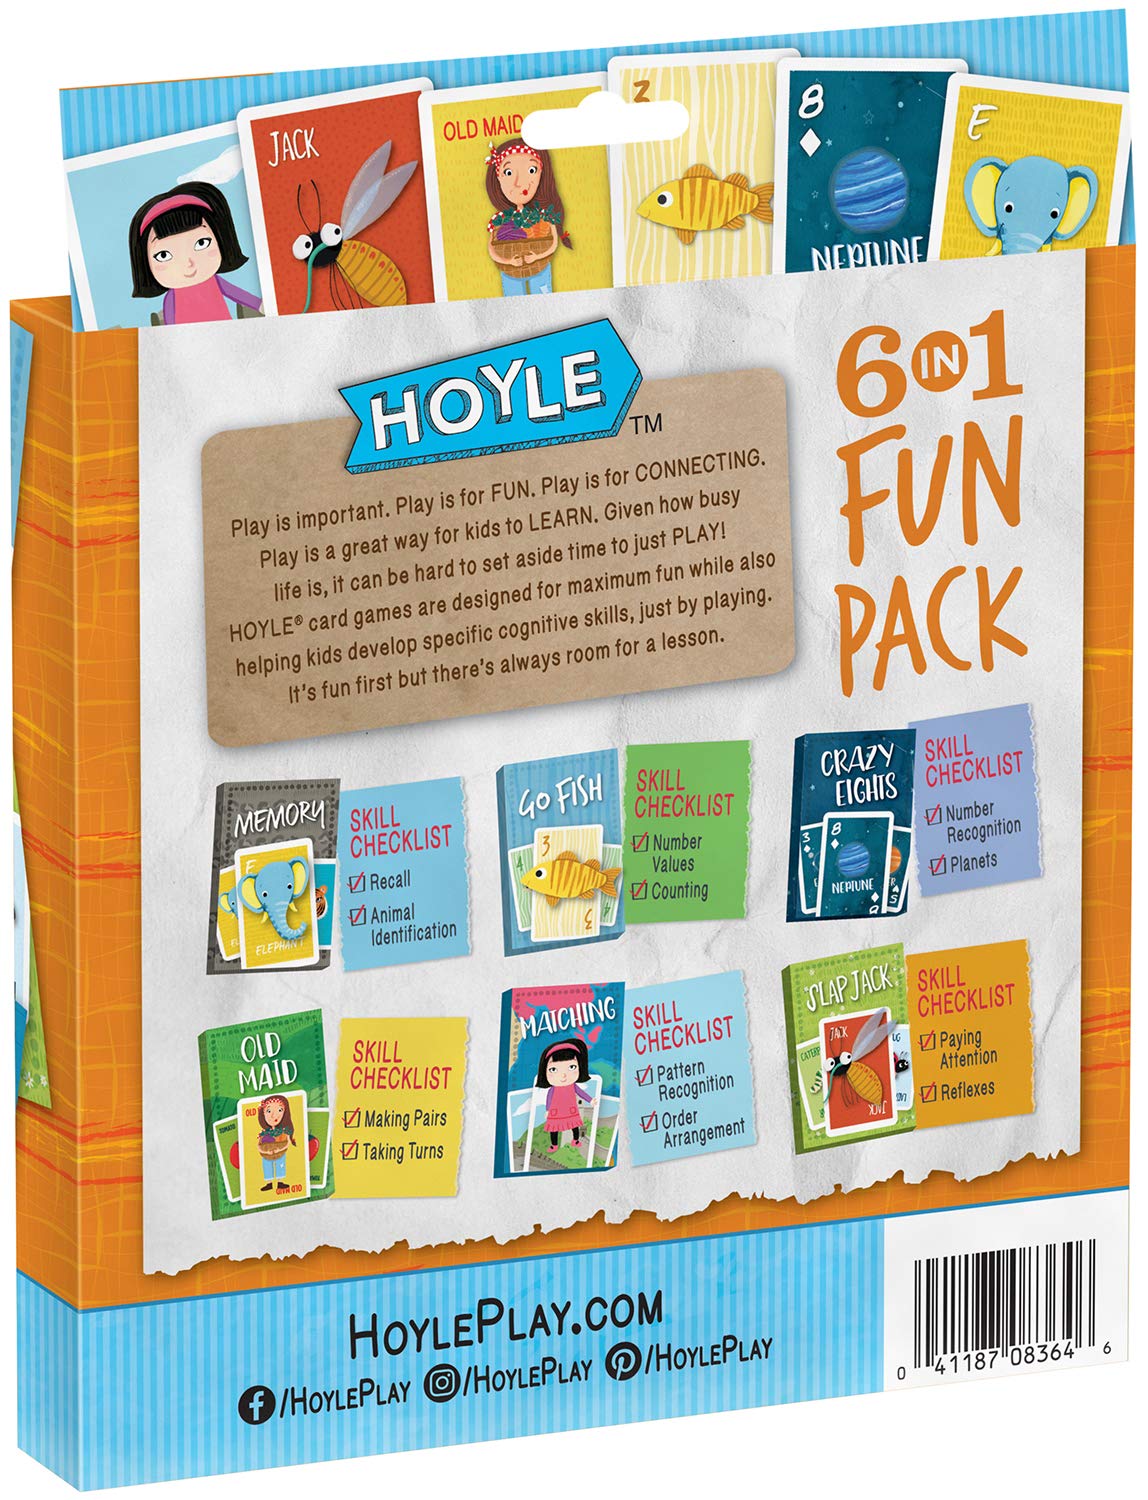 Hoyle 6 in 1 Fun Pack - Kids Card Games - Ages 3 & Up - Memory, Go Fish, Crazy Eights, Old Maid, Matching, Slap Jack